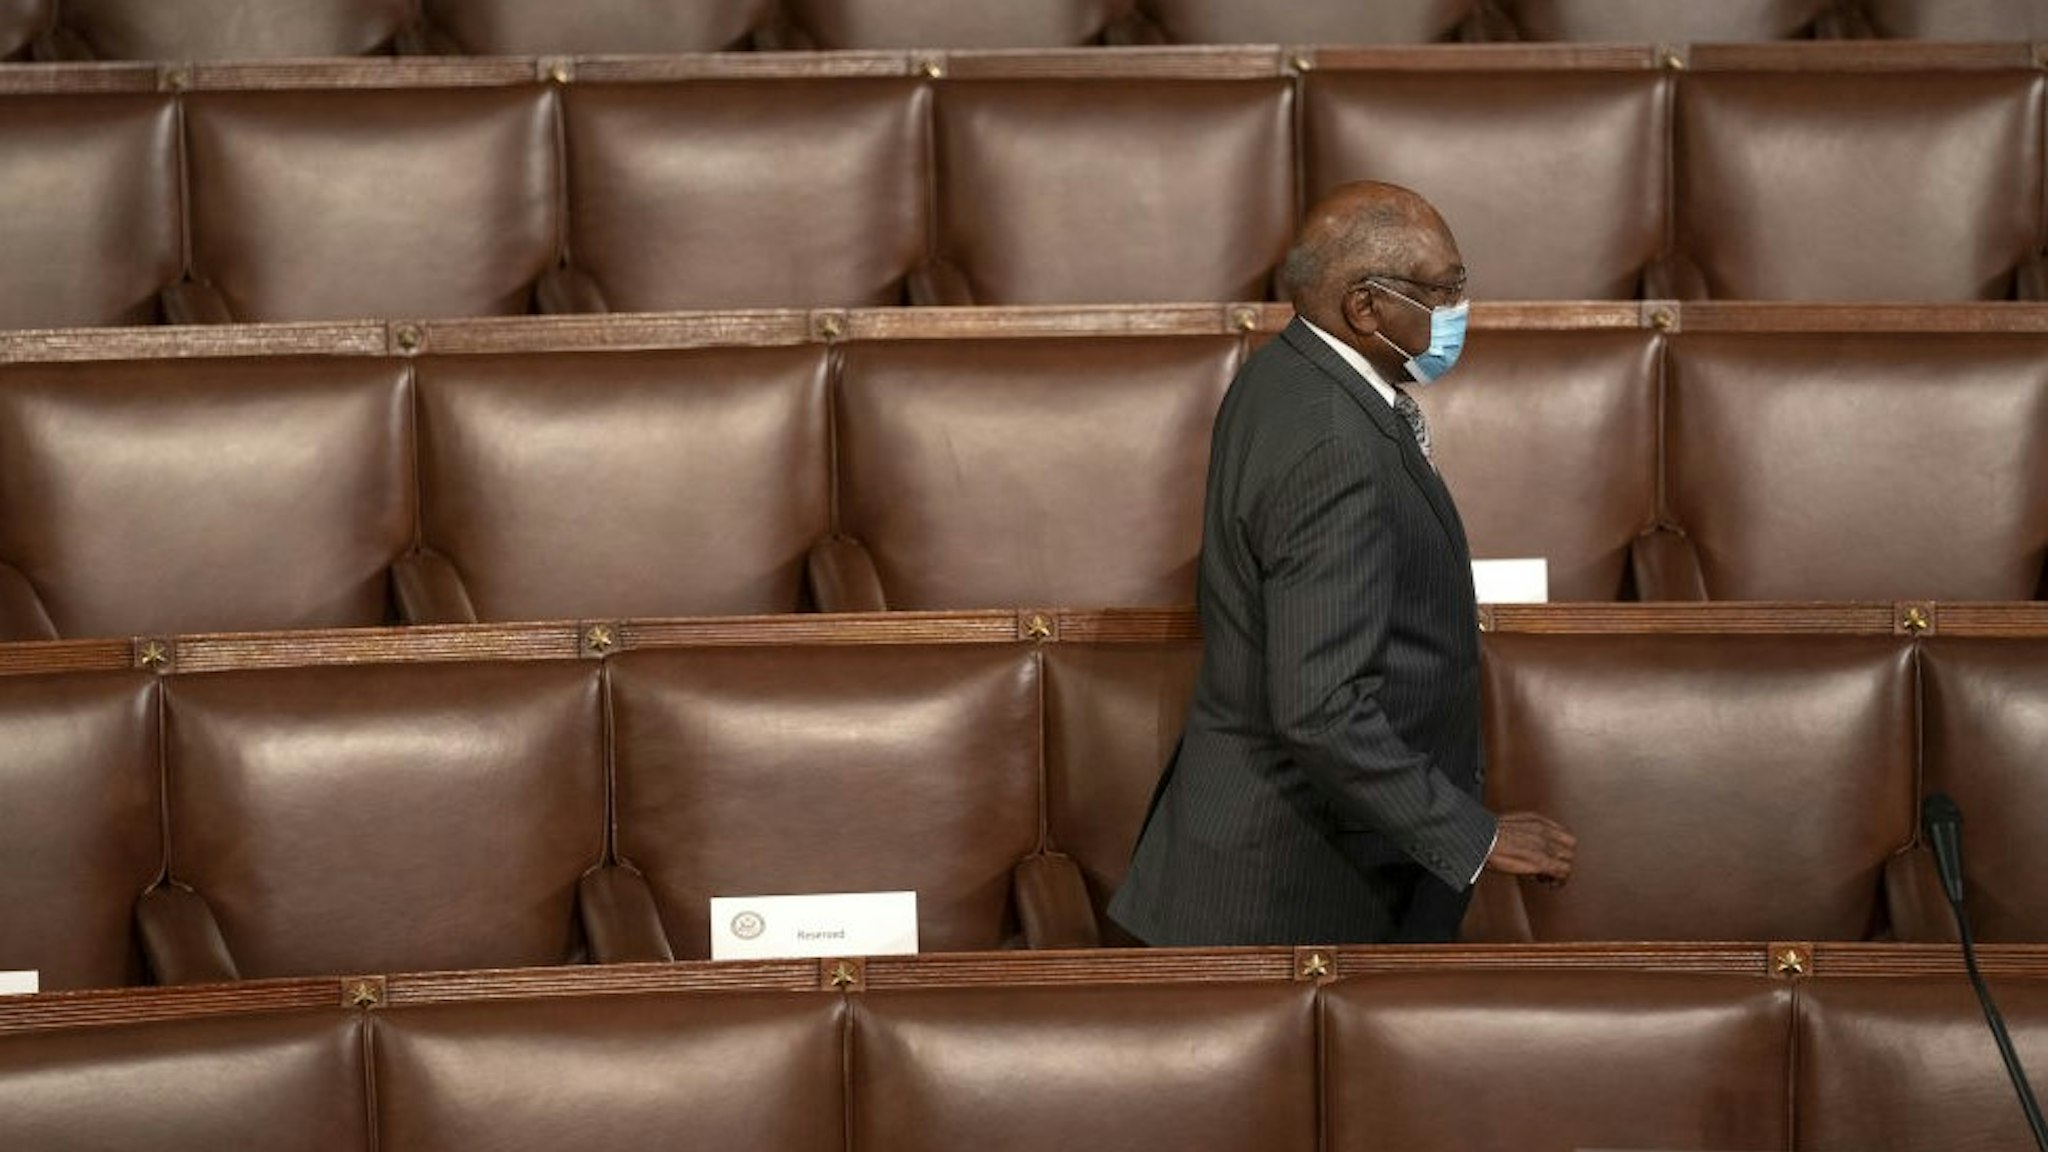 Representative James Clyburn, a Democrat from South Carolina, wears a protective mask while arriving to a joint session of Congress to count the Electoral College votes of the 2020 presidential election in the House Chamber in Washington, D.C., U.S., on Wednesday, Jan. 6, 2021. Congress is meeting to certify Joe Biden as the winner of the 2020 presidential election, with scores of Republican lawmakers preparing to challenge the tally in a number of states during what is normally a largely ceremonial event. Photographer: